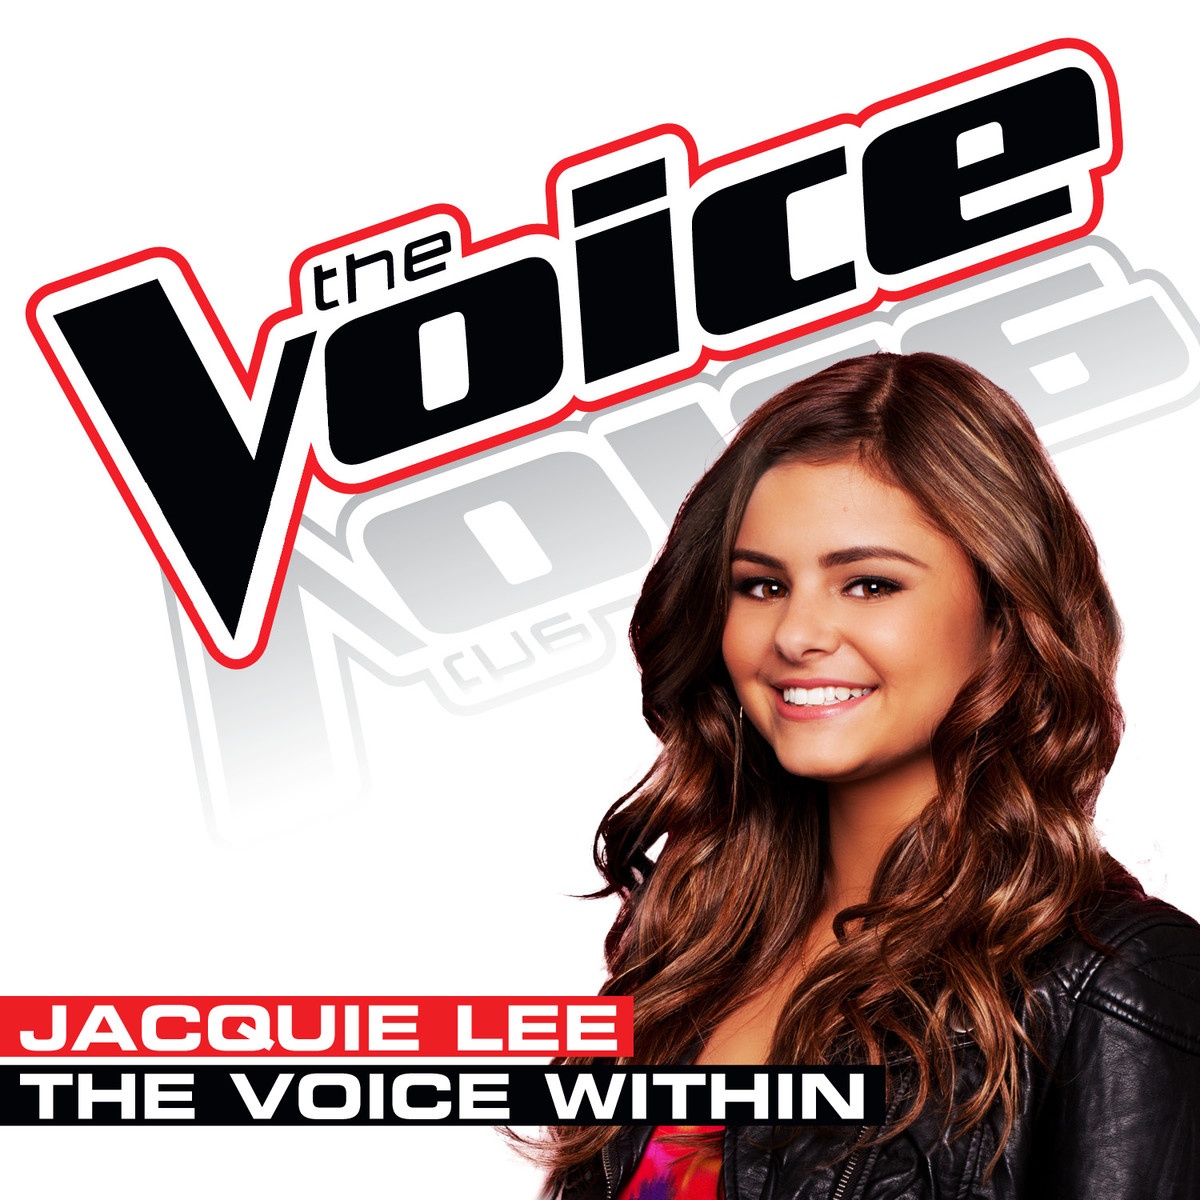 The Voice Within (The Voice Performance)